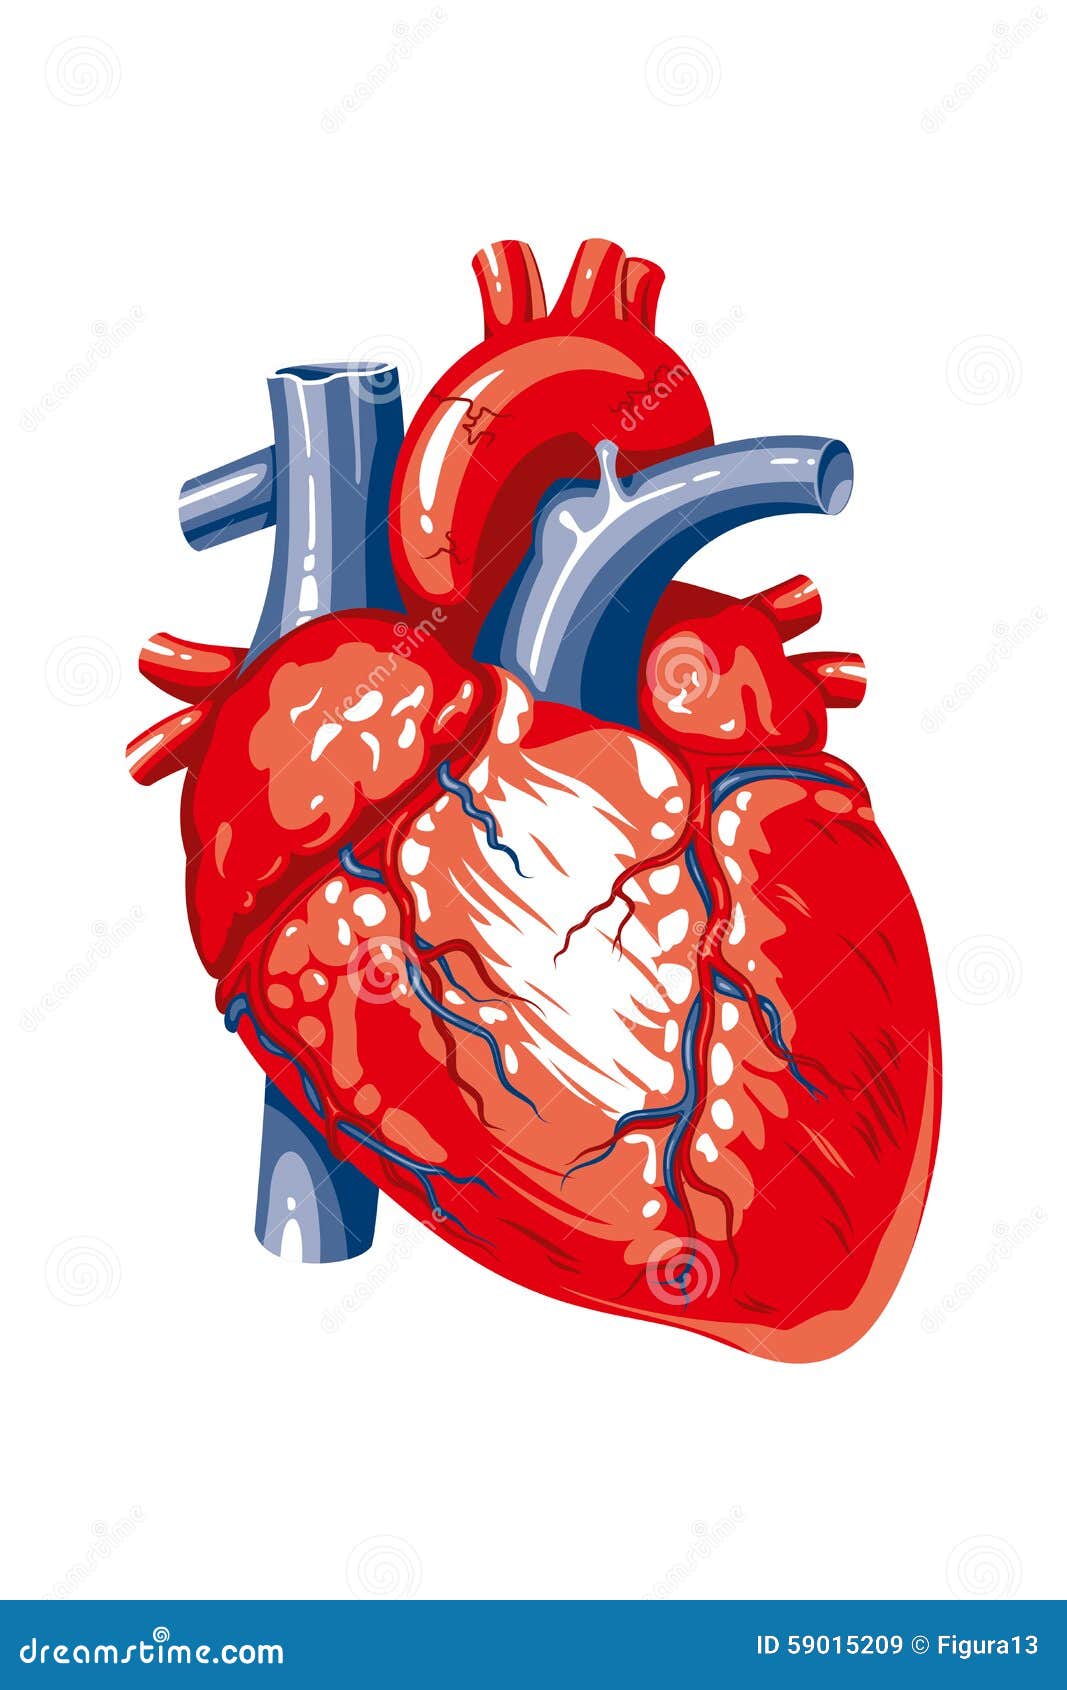 Human Heart On A White Background Stock Vector - Image: 59015209